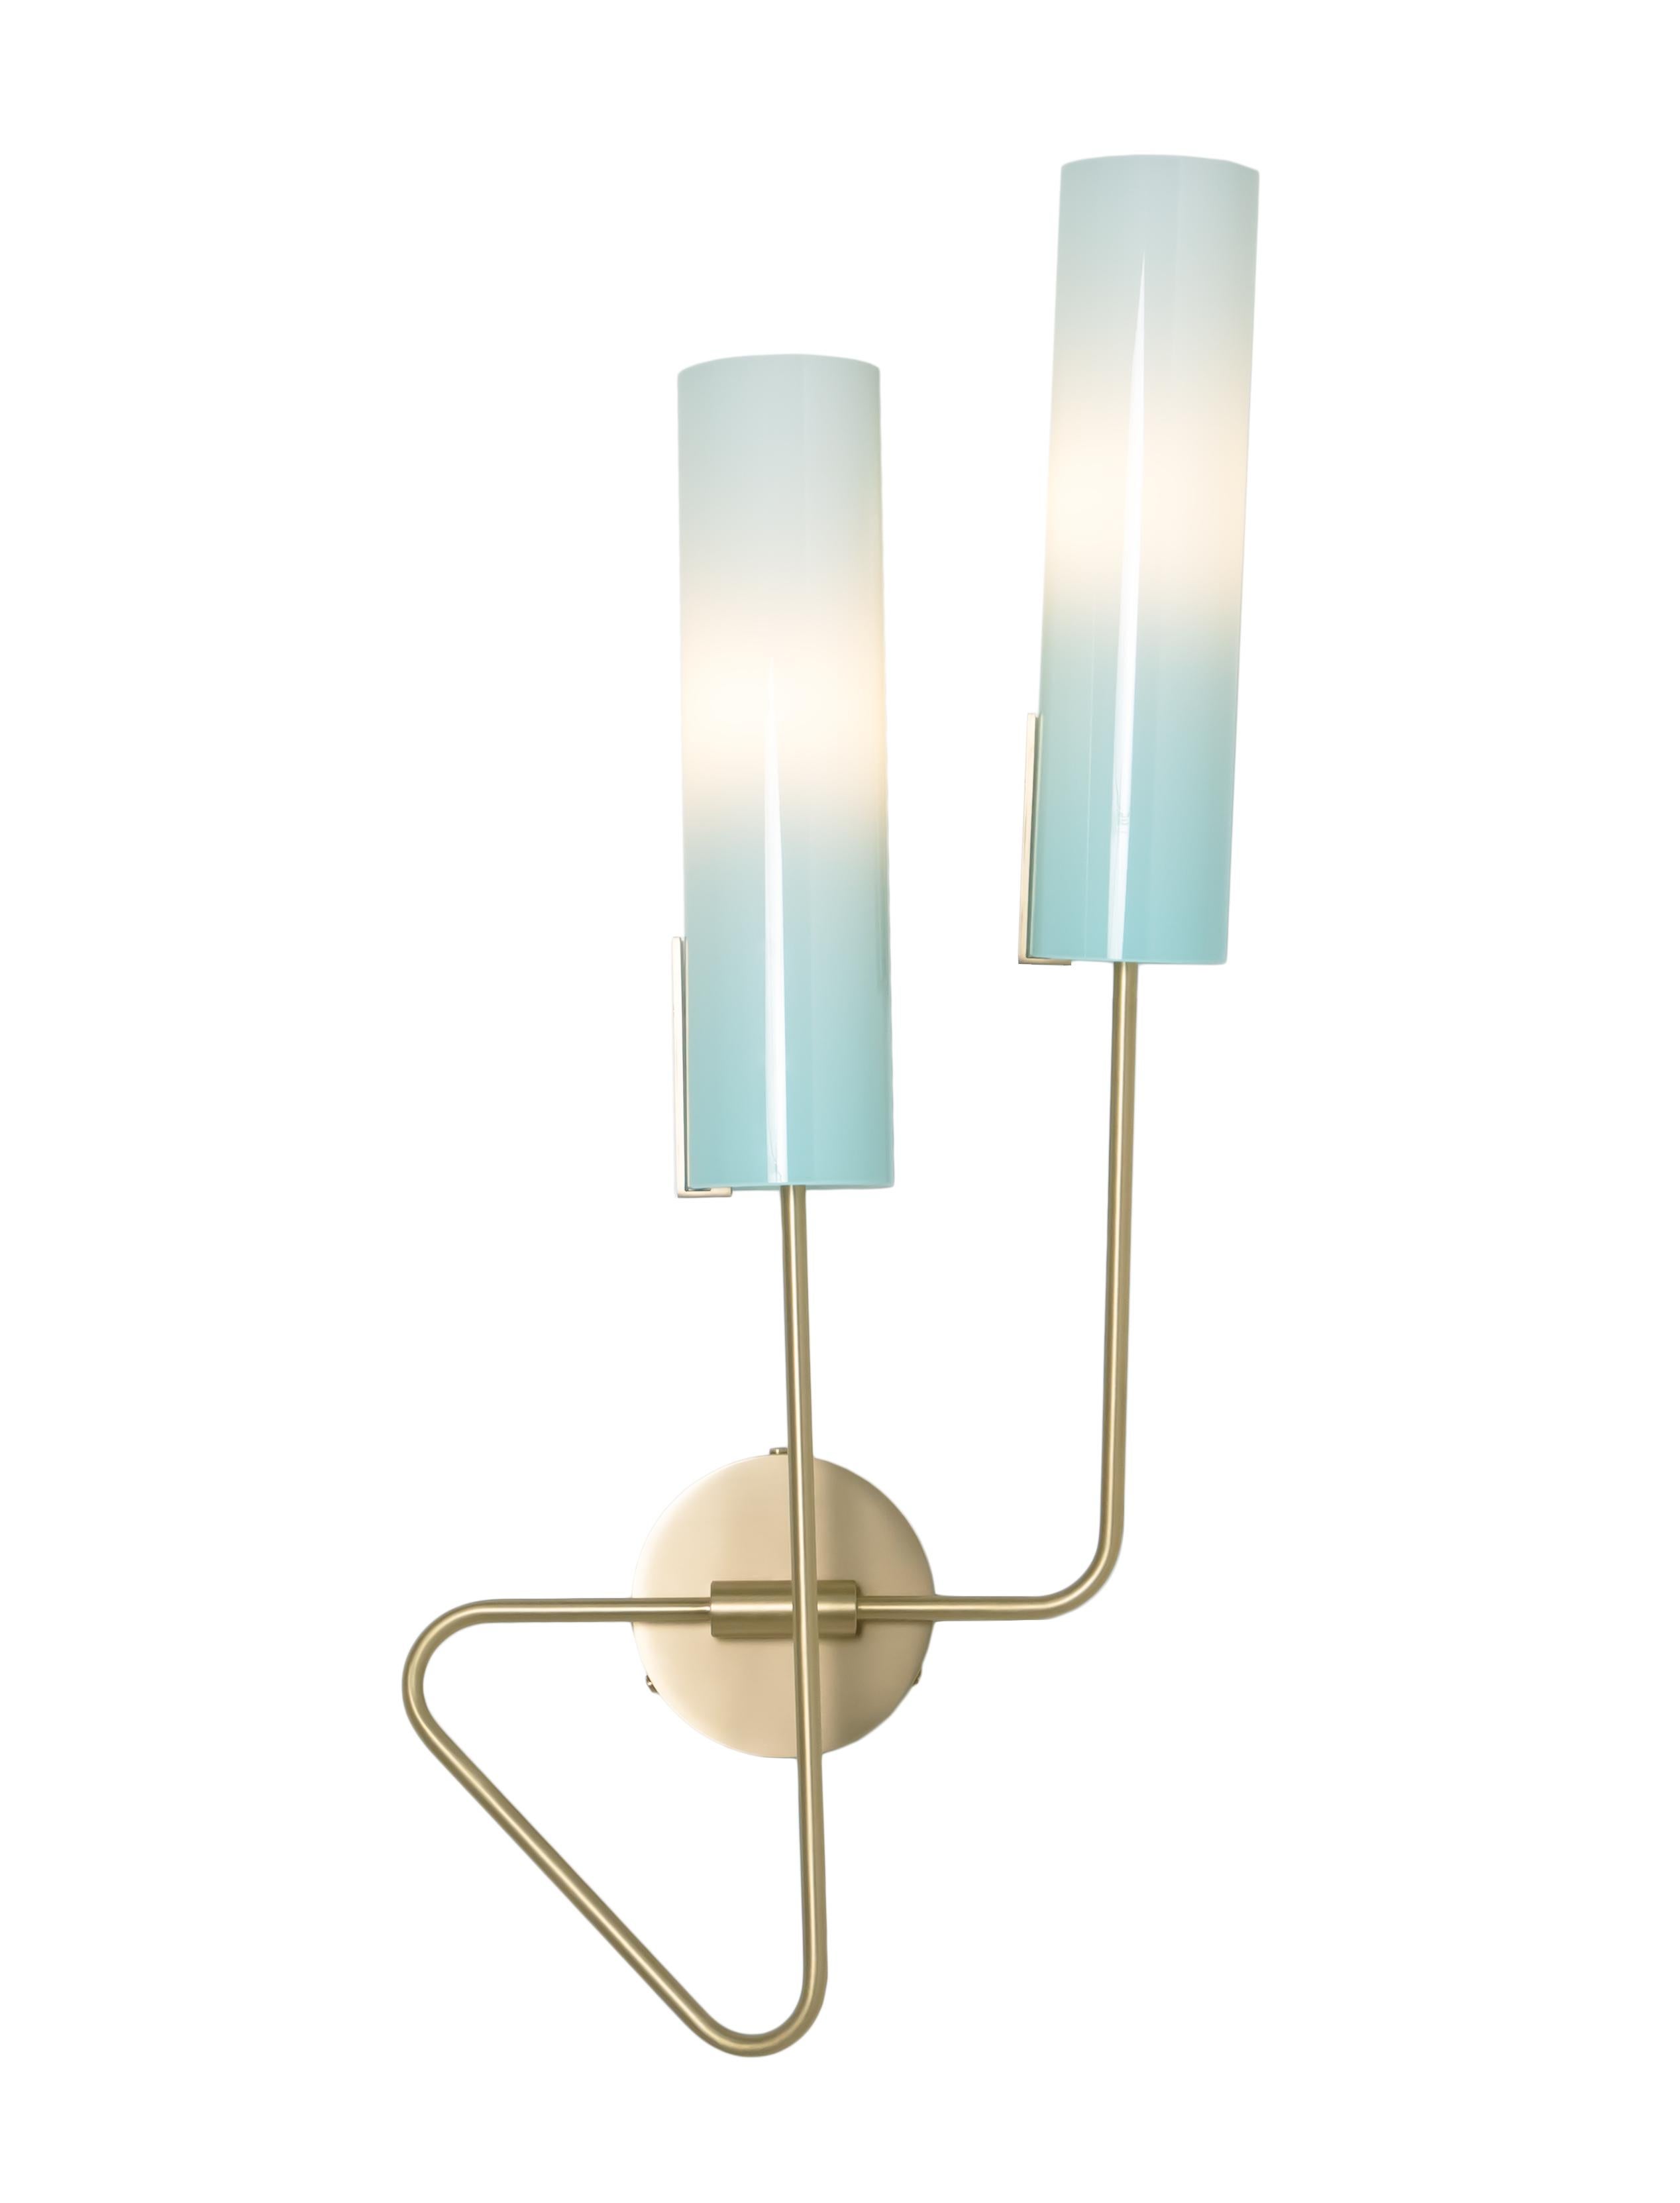 Continuum 01 Sconce: Satin Nickel/Slate Ombre Glass Shades by Avram Rusu Studio In New Condition For Sale In Brooklyn, NY